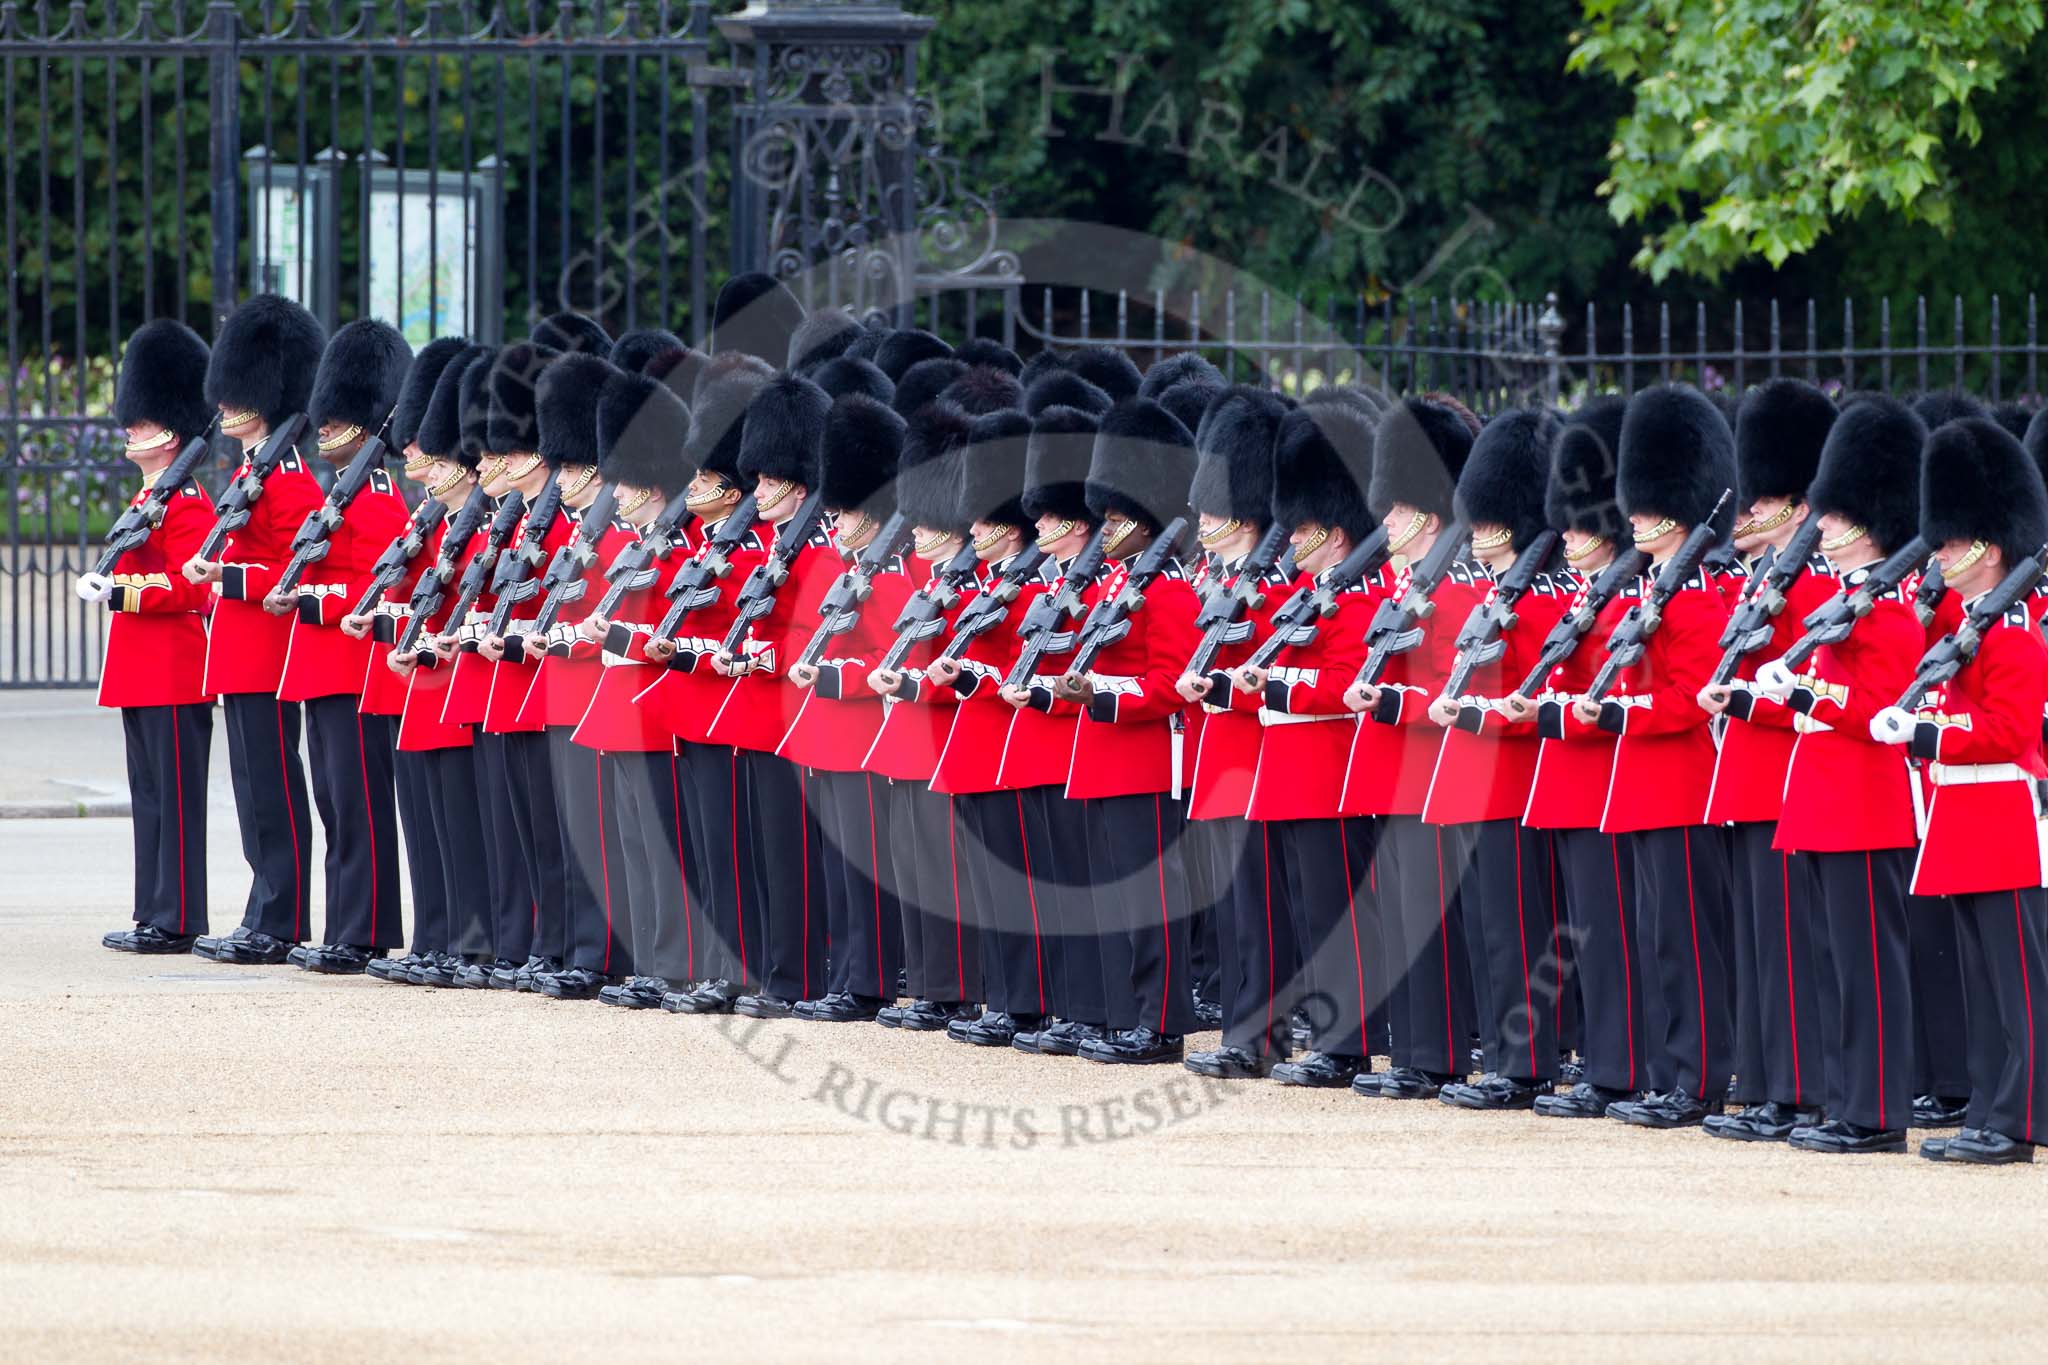 The Major General's Review 2011: No. 2 (?) Guard, B Company Scots Guards, taking up their position on Horse Guards Parade. Behind the gates is St. James's Park..
Horse Guards Parade, Westminster,
London SW1,
Greater London,
United Kingdom,
on 28 May 2011 at 10:28, image #44